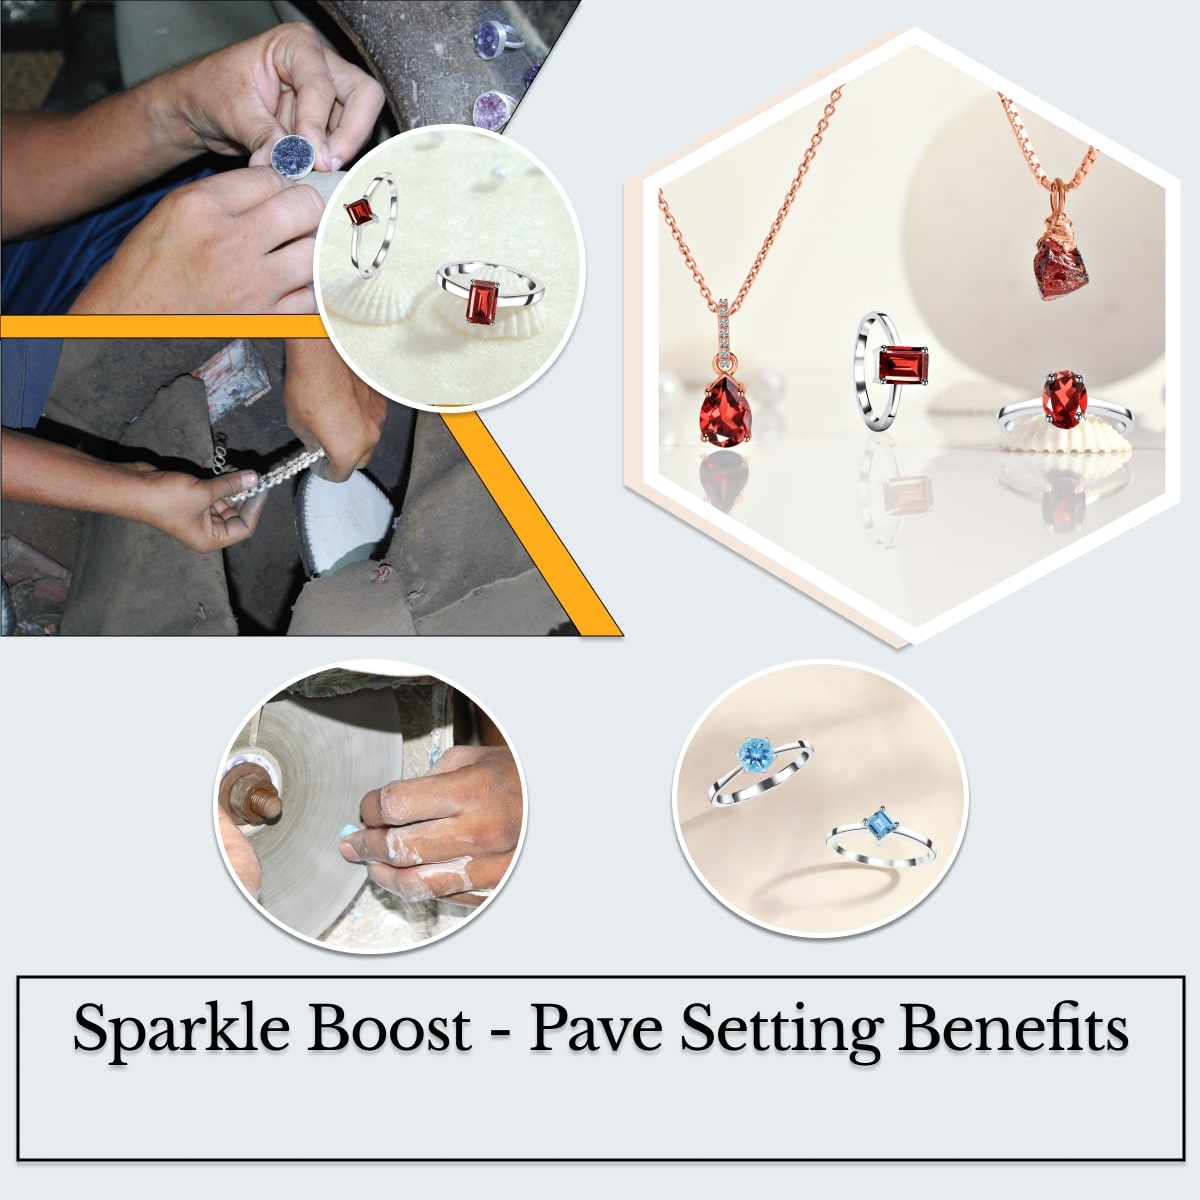 Advantages of Pave Setting